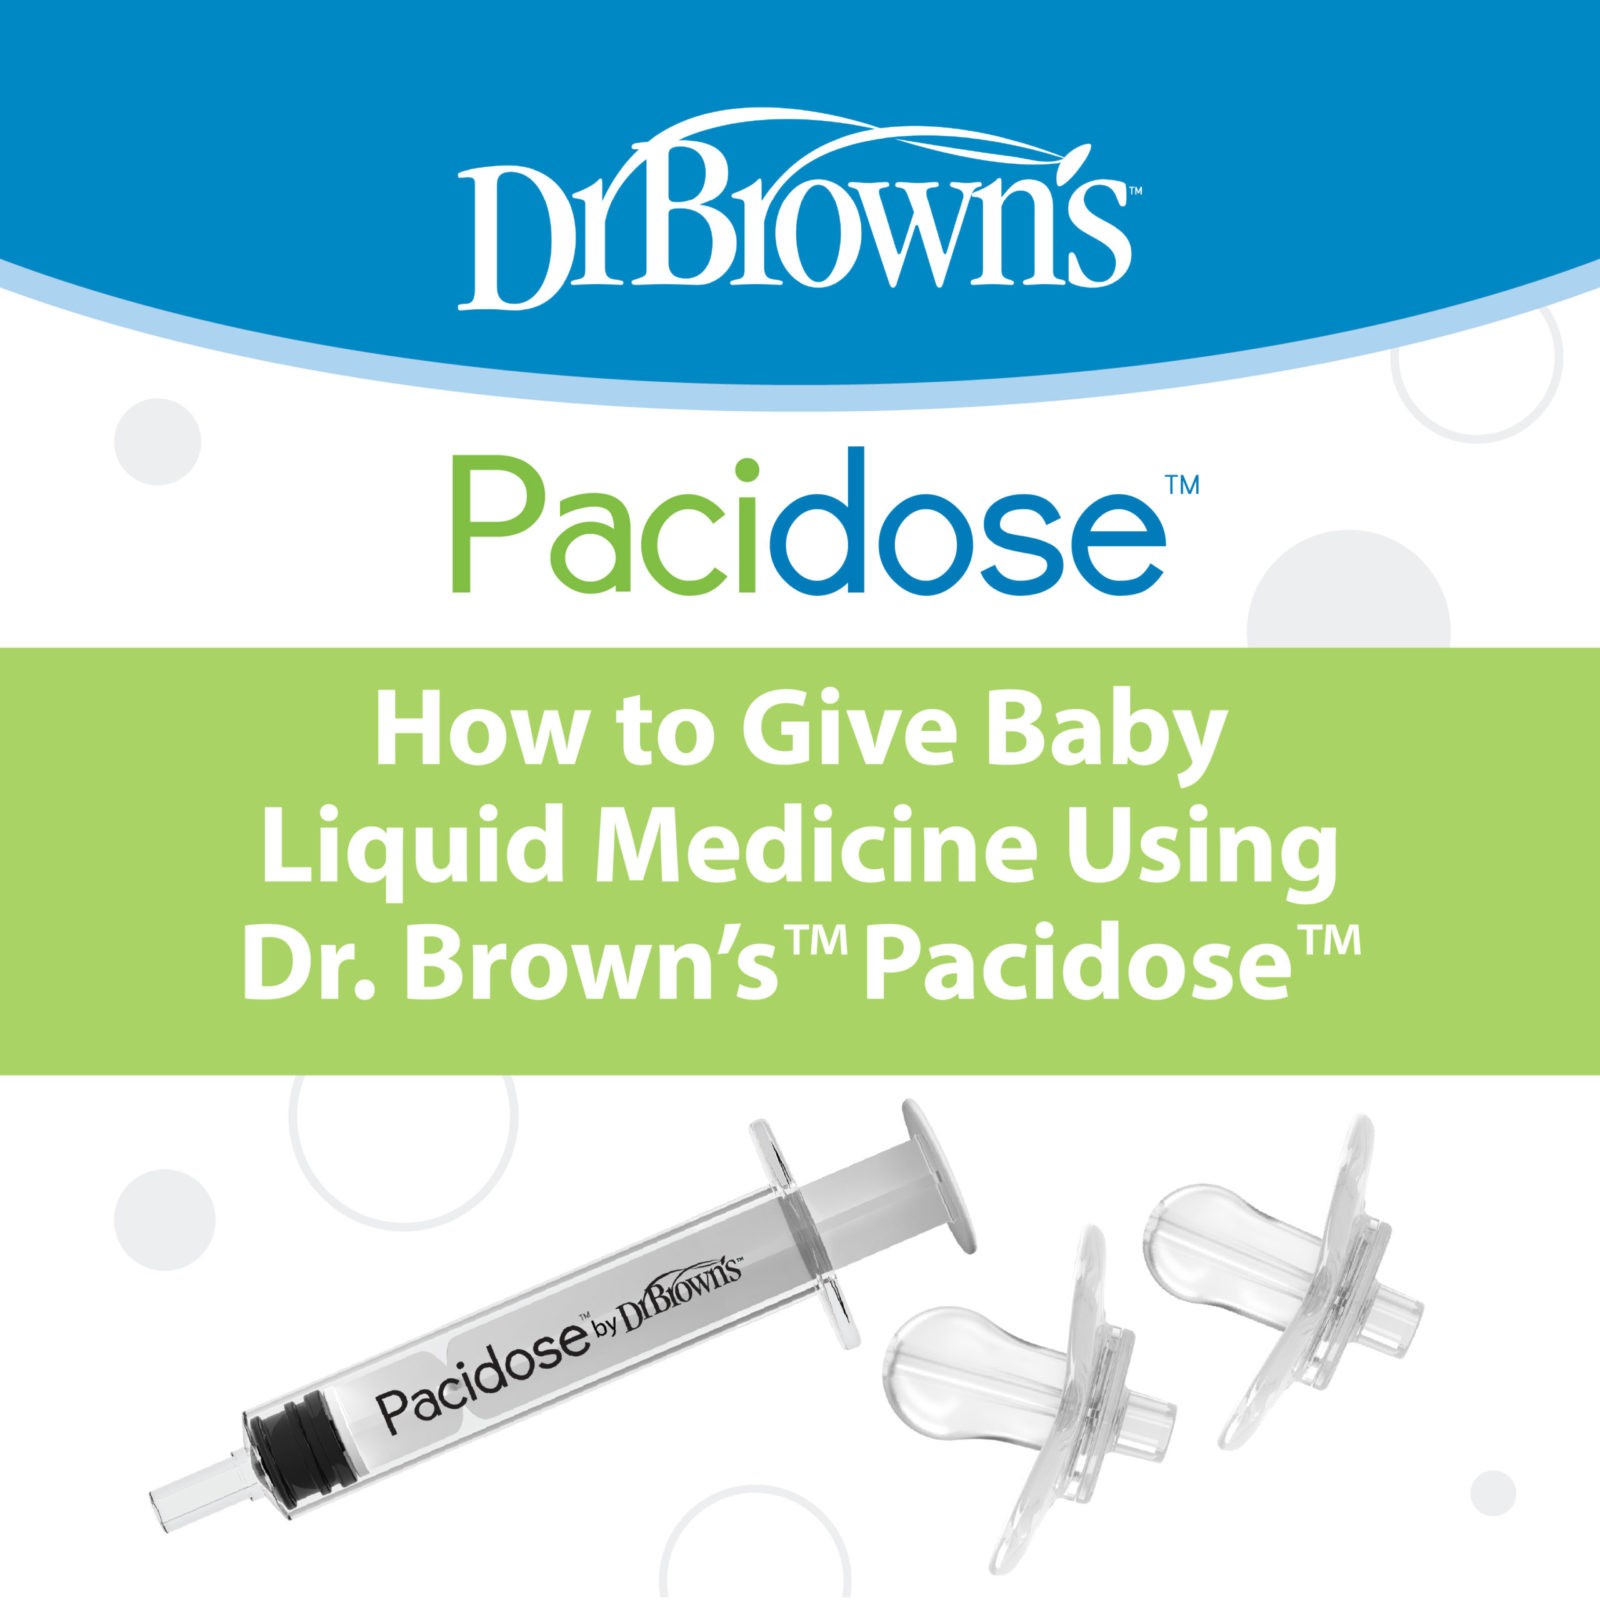 Dr. Brown's Pacidose, How to Give Baby Liquid Medicine Using Dr. Brown's Pacidose